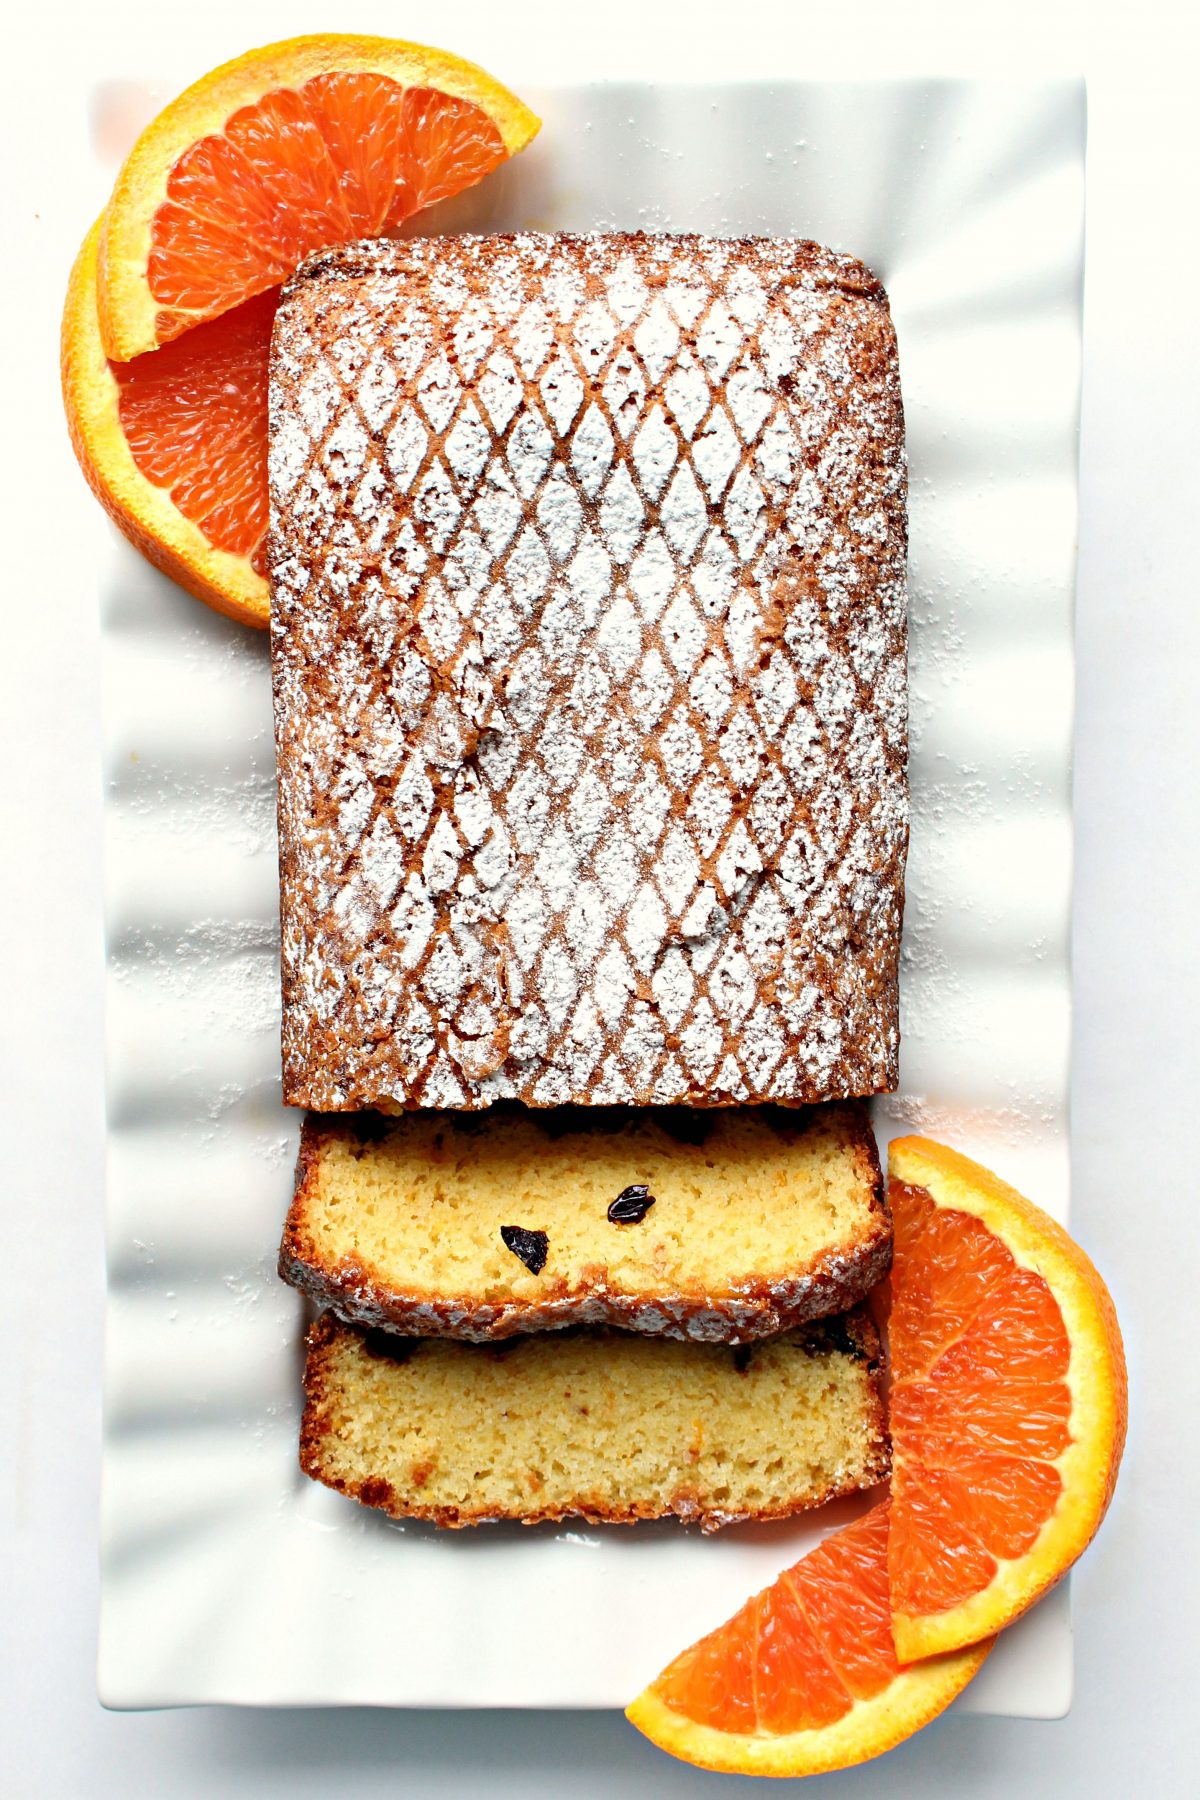 Orange loaf cake topped with powdered sugar grid design on a white platter with orange slices.